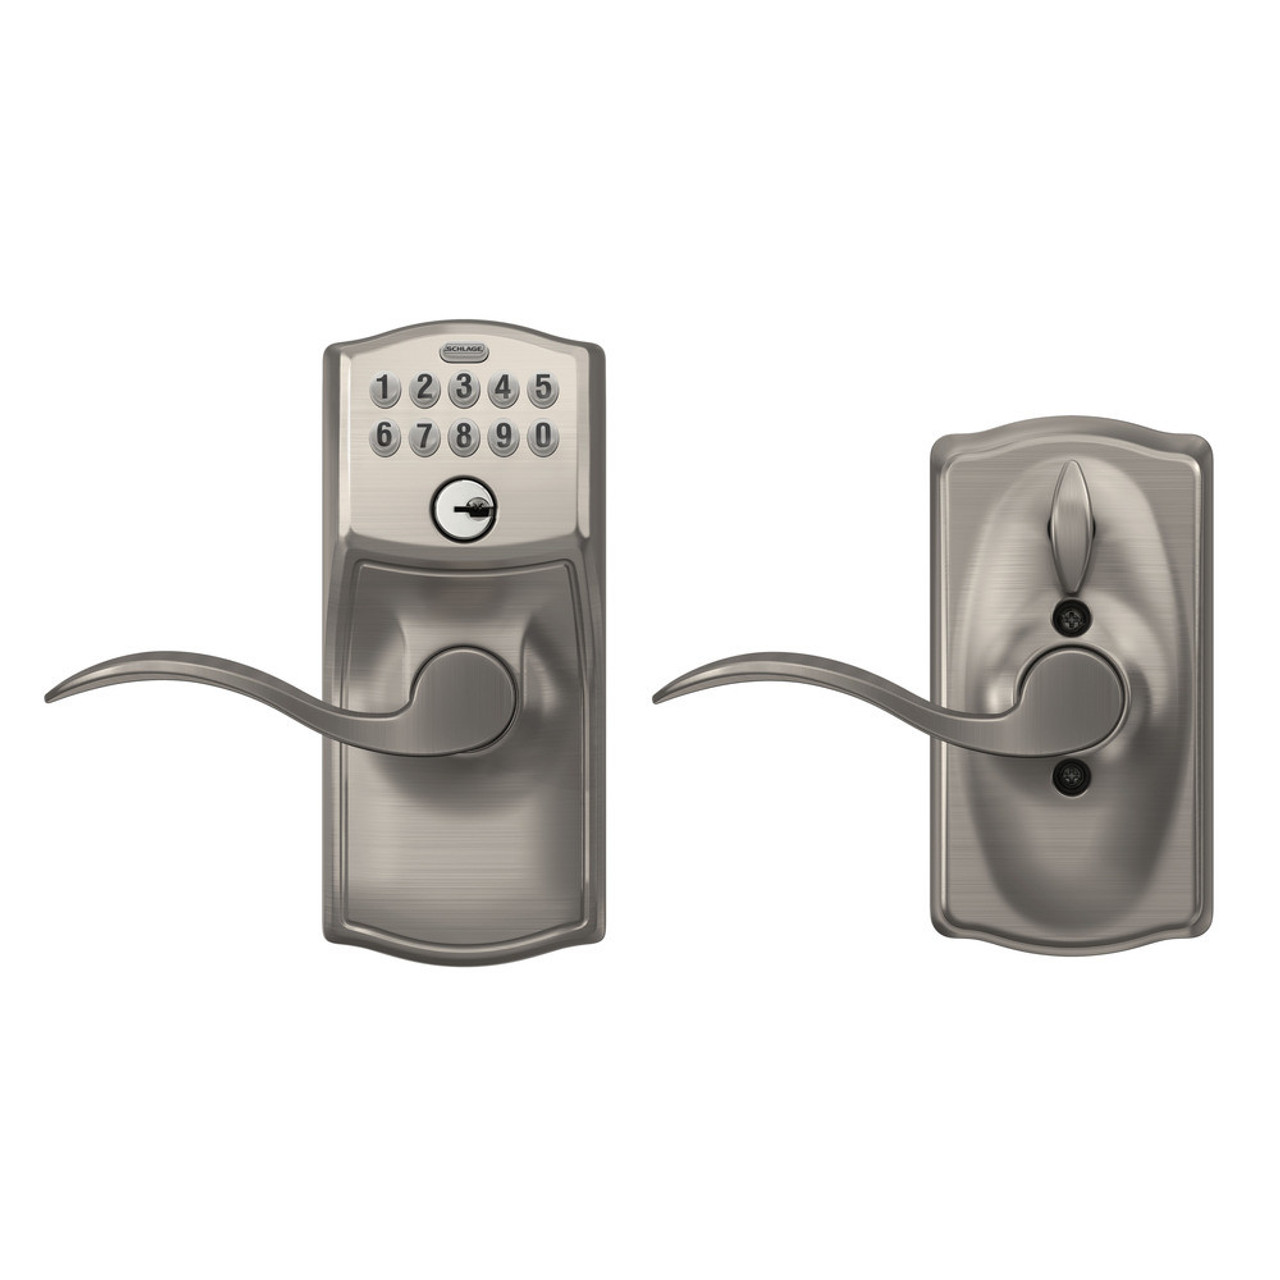 Schlage FE595 - Electronic Keypad Entry with Flex-Lock Camelot Housing and Accent Levers